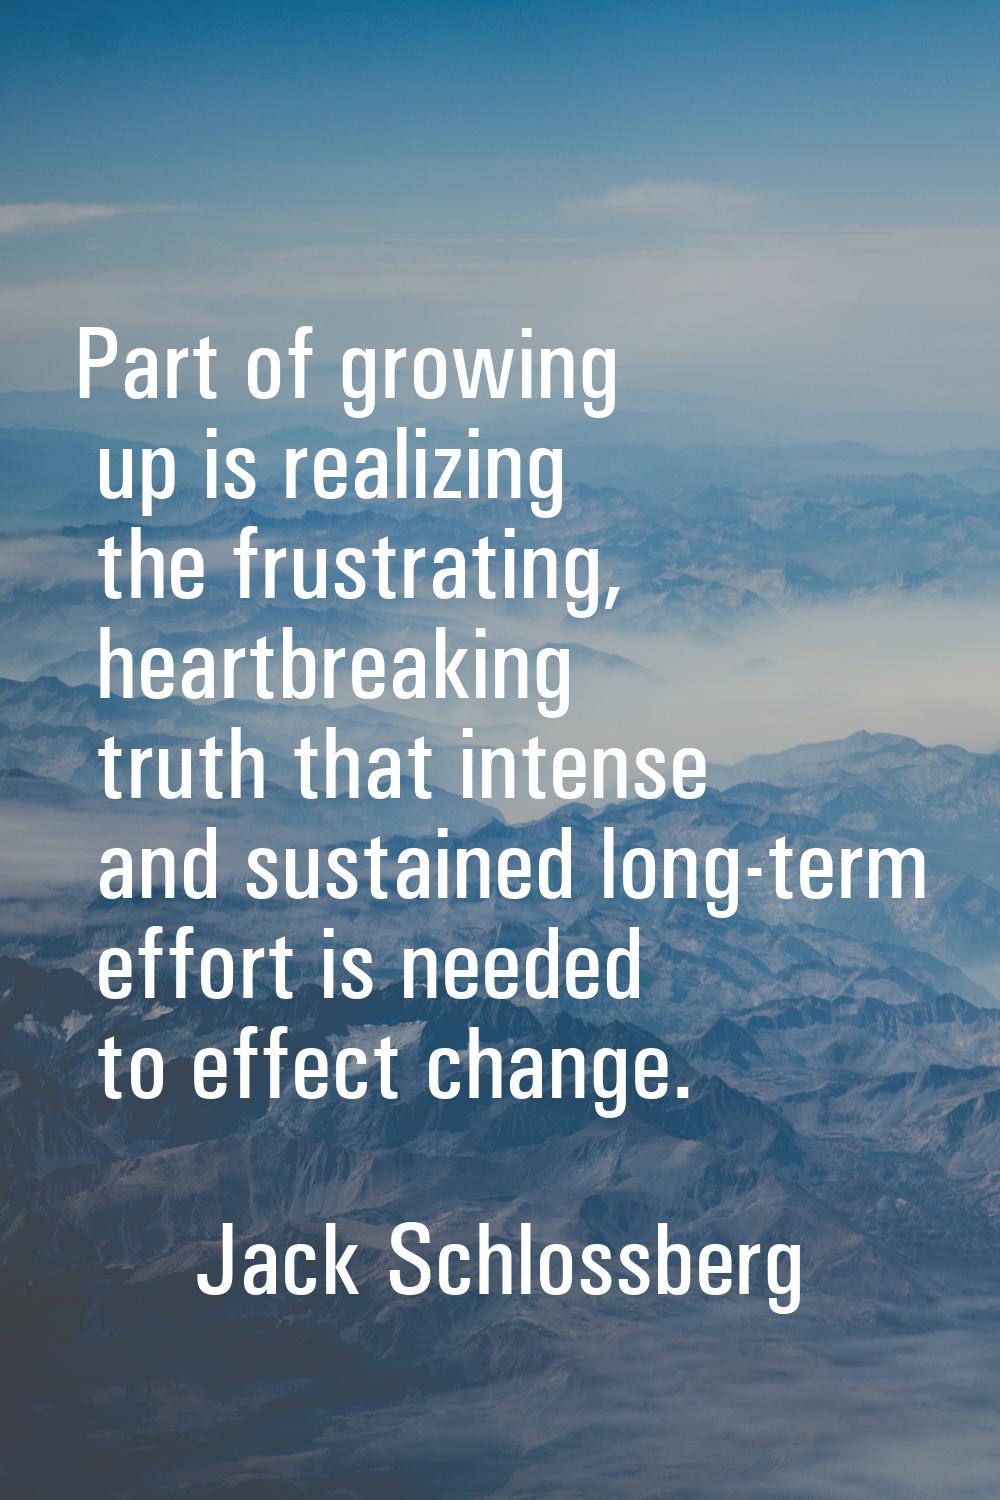 Part of growing up is realizing the frustrating, heartbreaking truth that intense and sustained lon